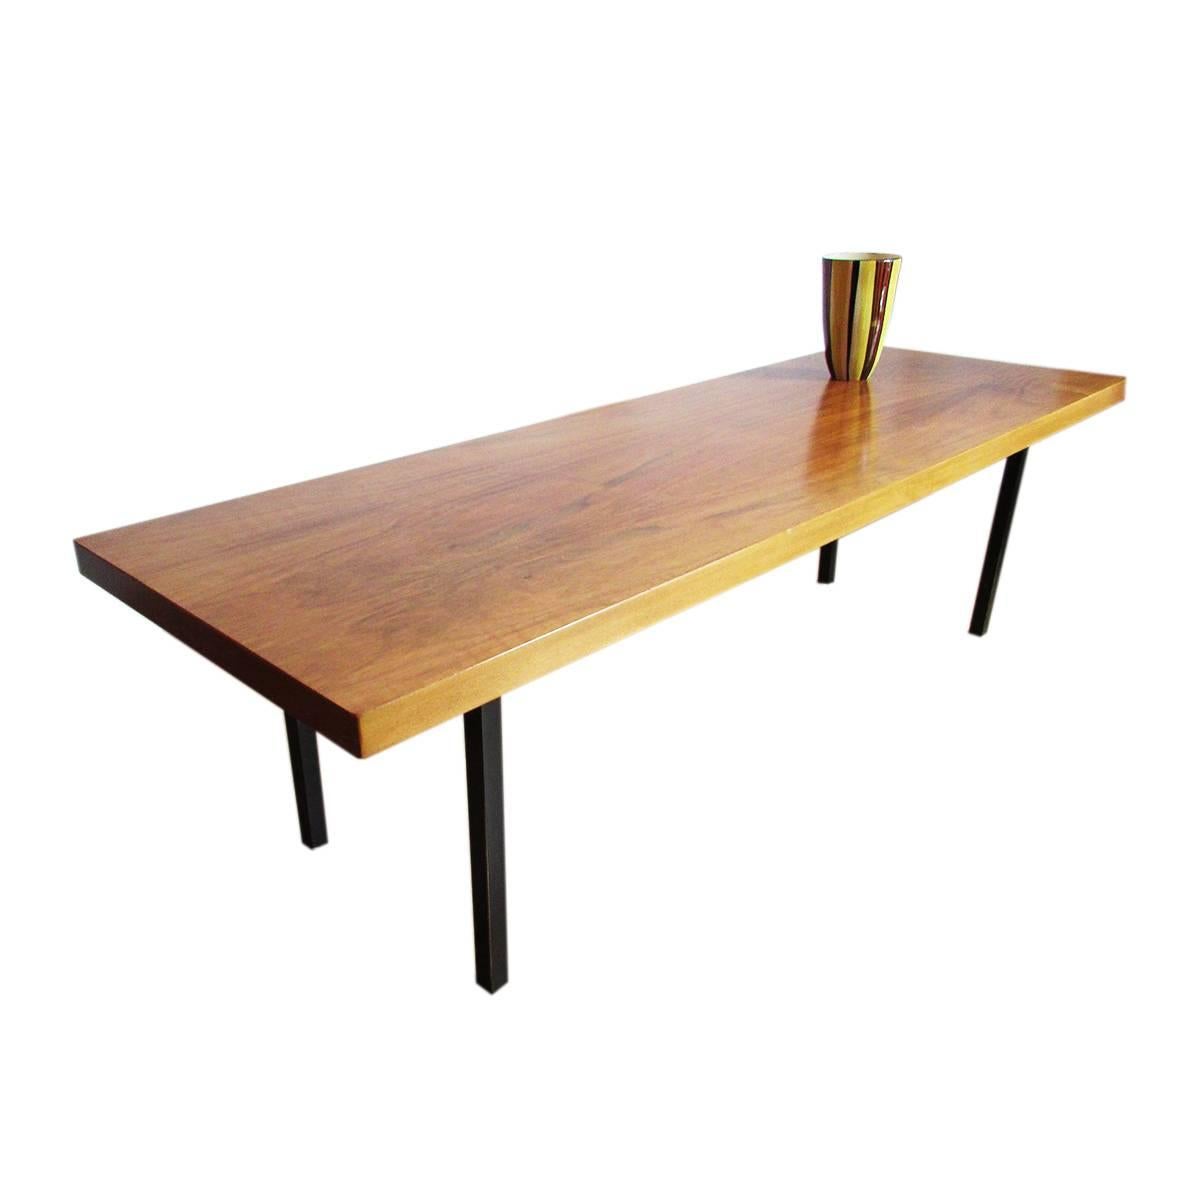 Well proportioned American walnut coffee table.
Made in Switzerland circa 1960 by Weibel, following the minimalistic trend of that time.
 